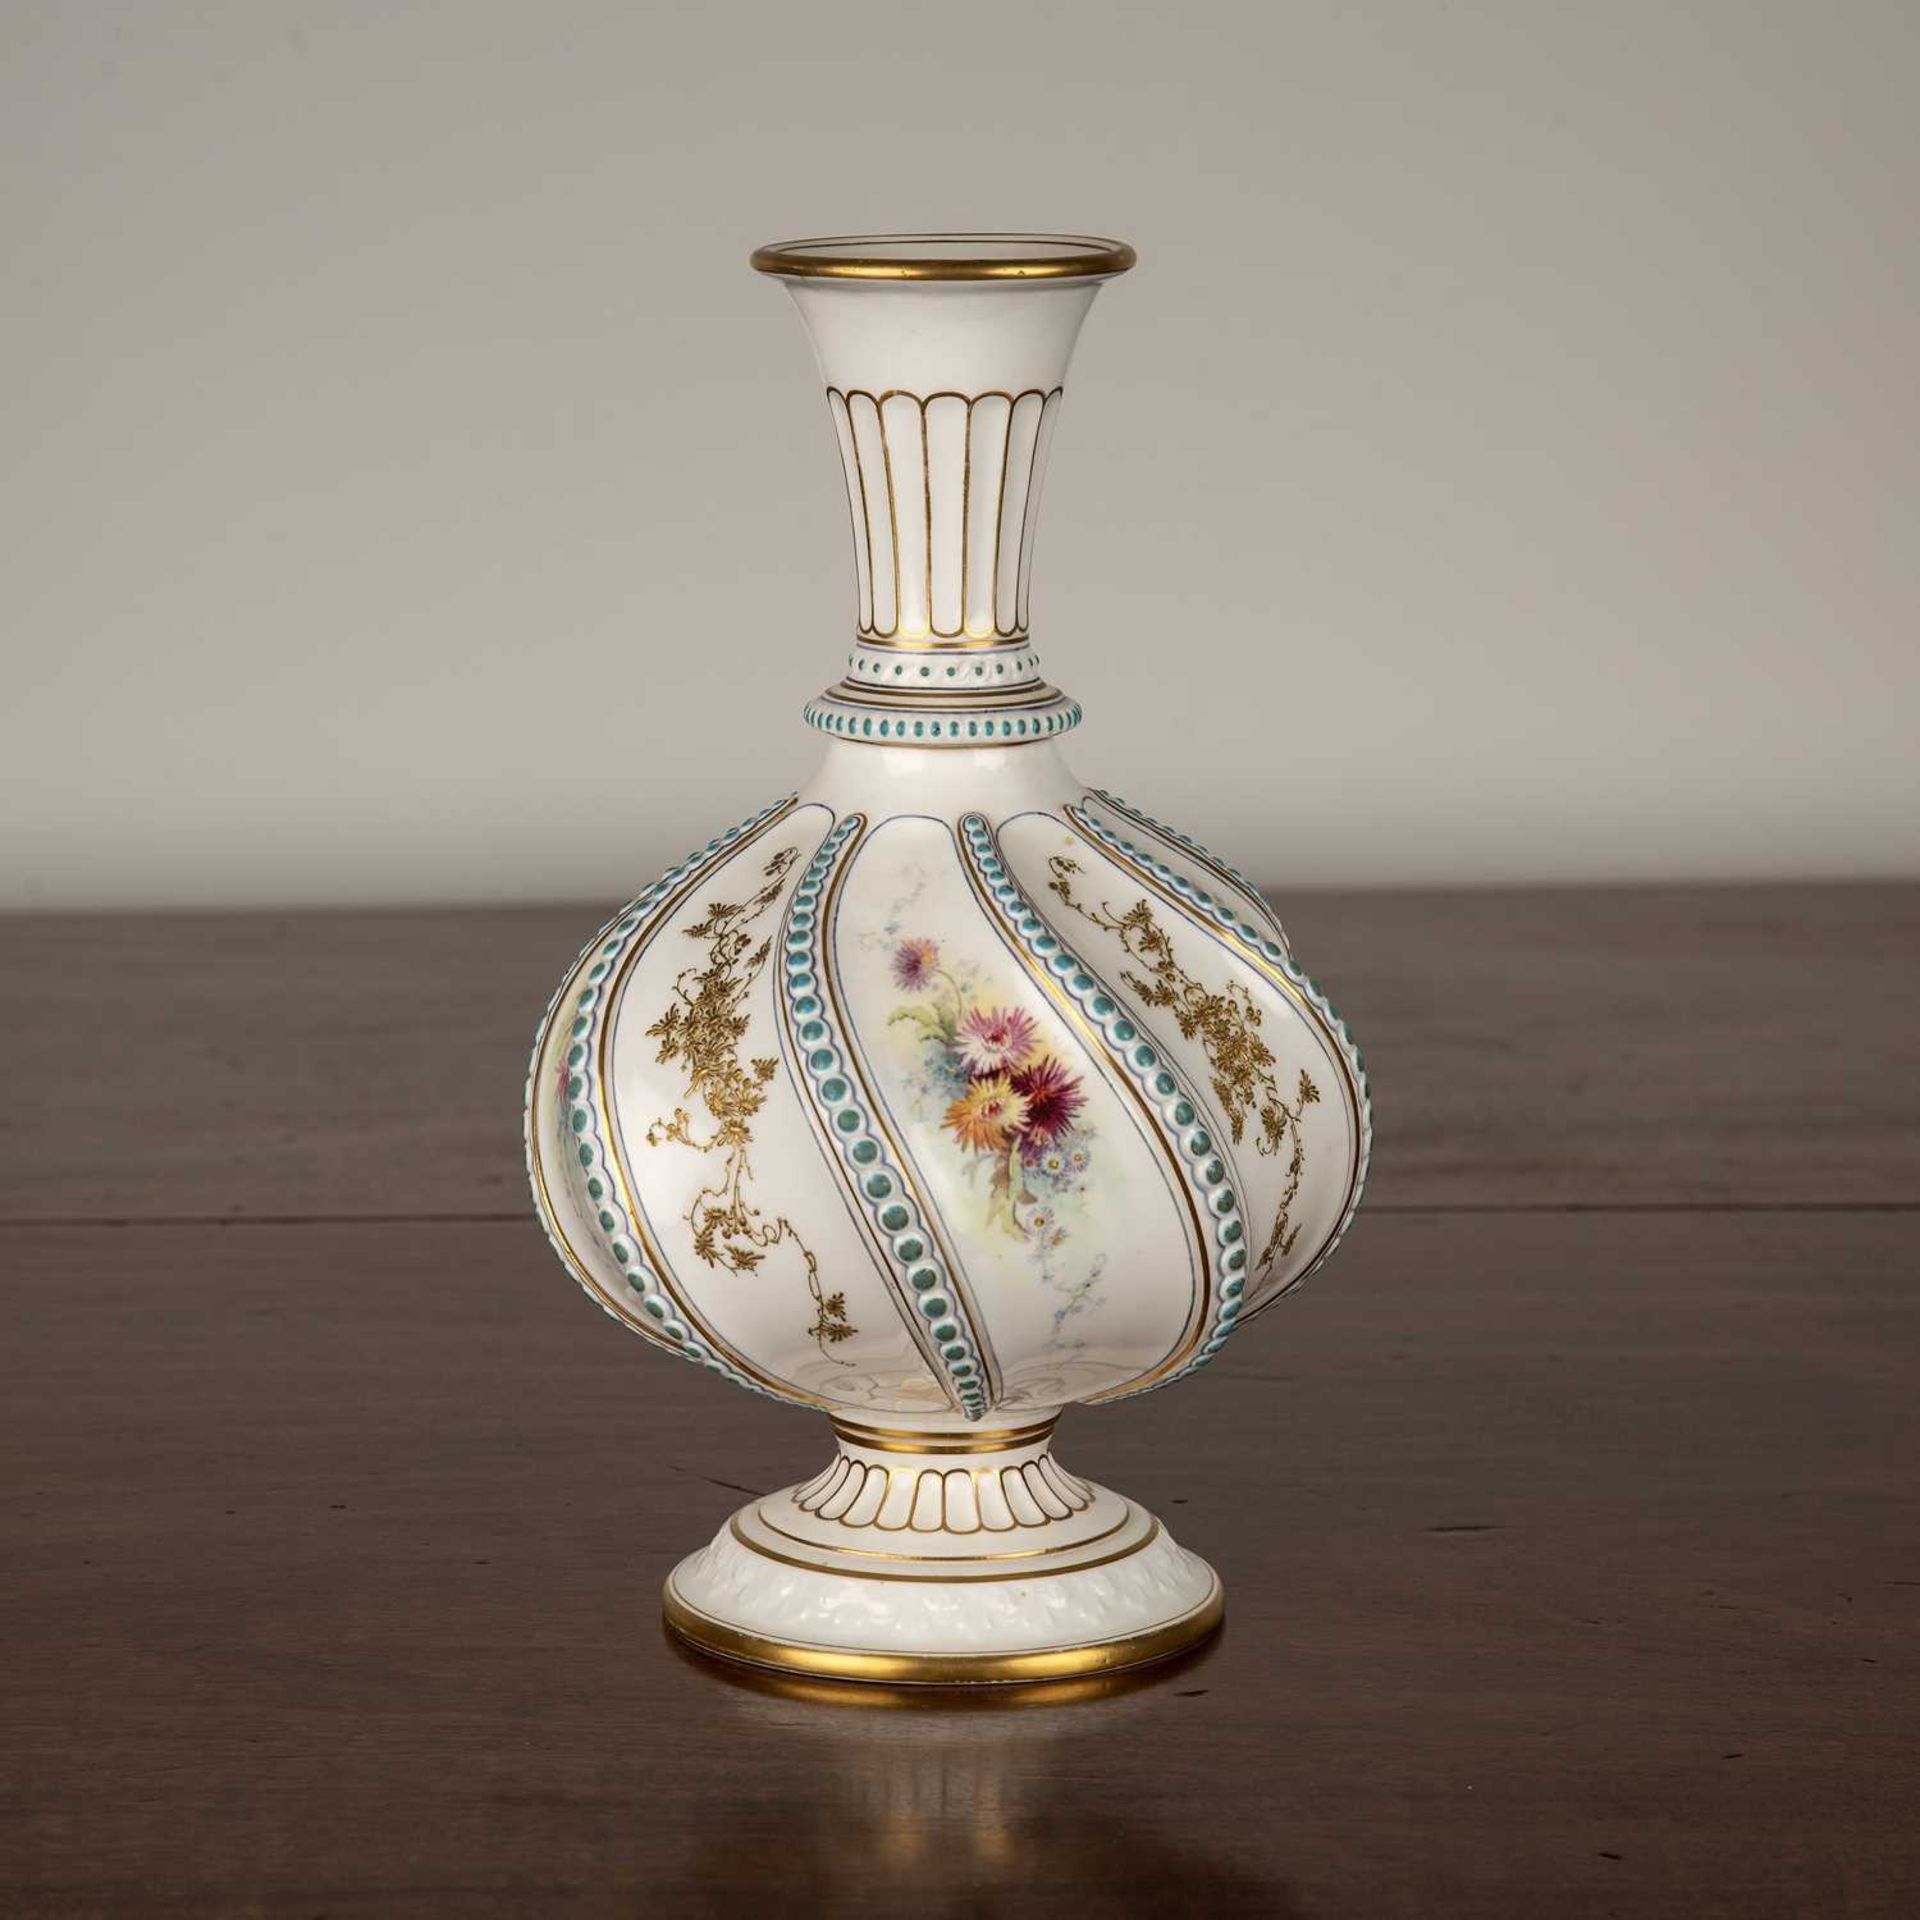 Royal Worcester porcelain vase the body of wrythen form decorated with handpainted flowers and